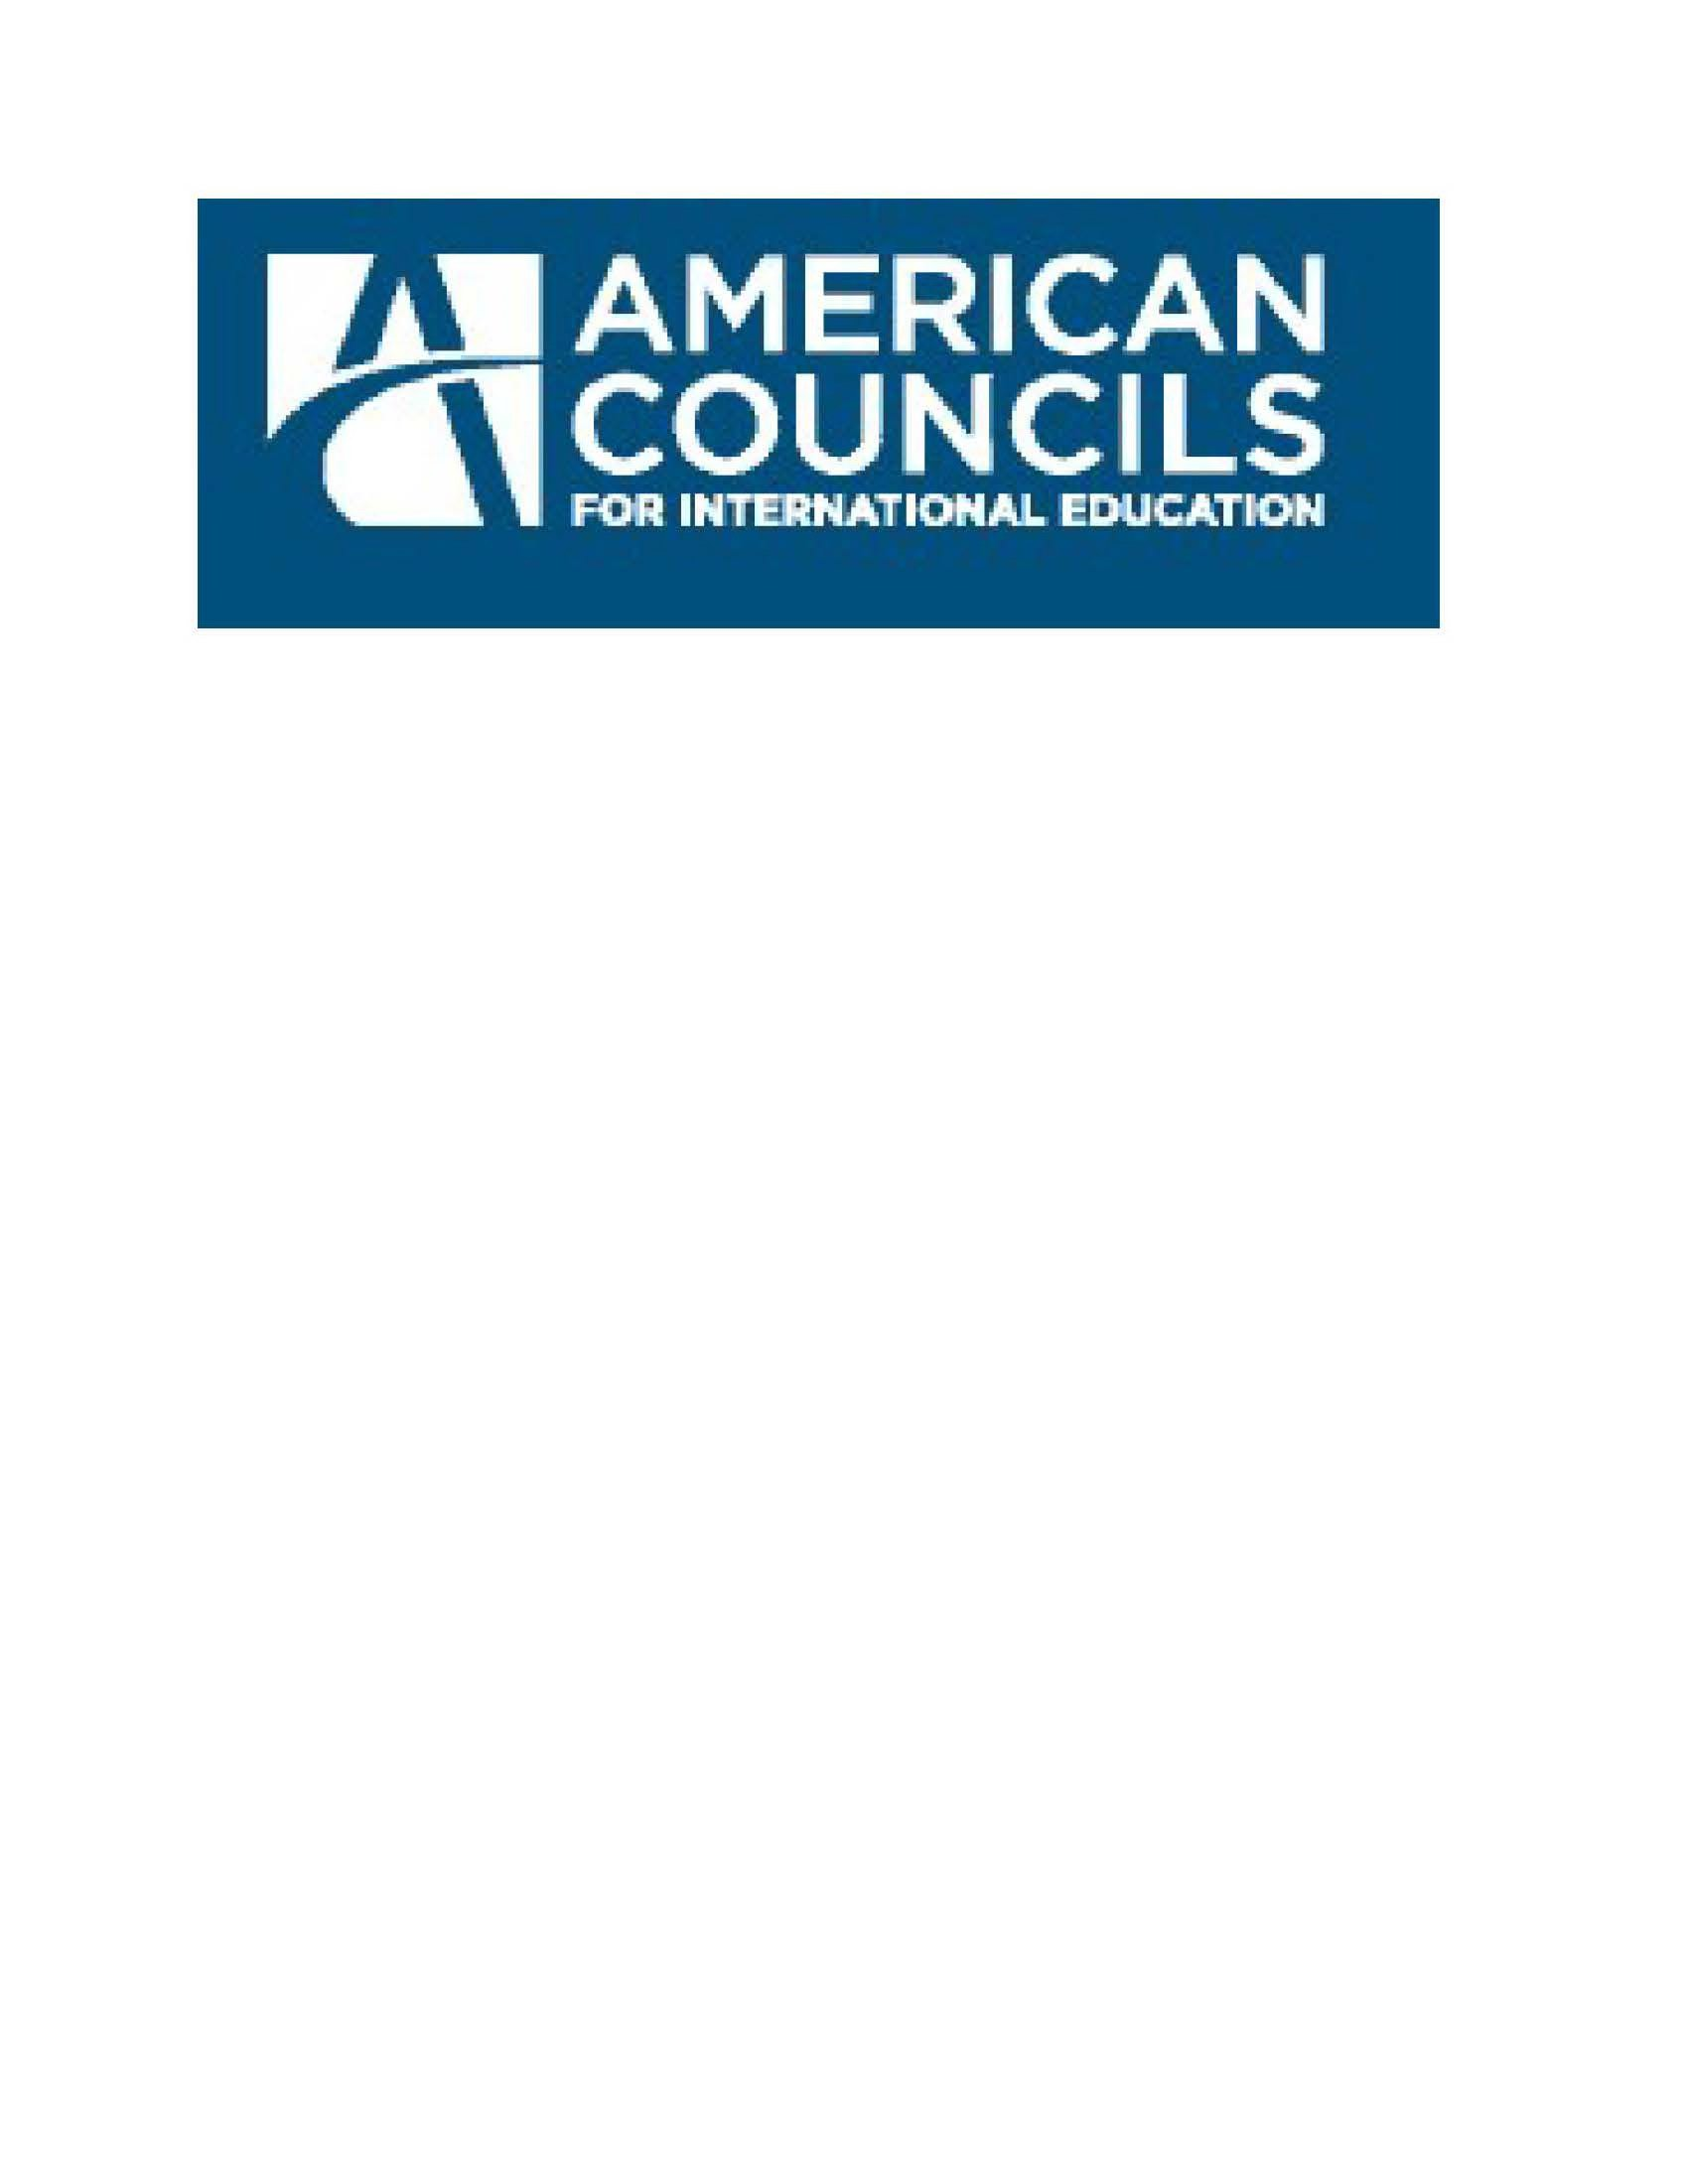  AMERICAN COUNCILS FOR INTERNATIONAL EDUCATION